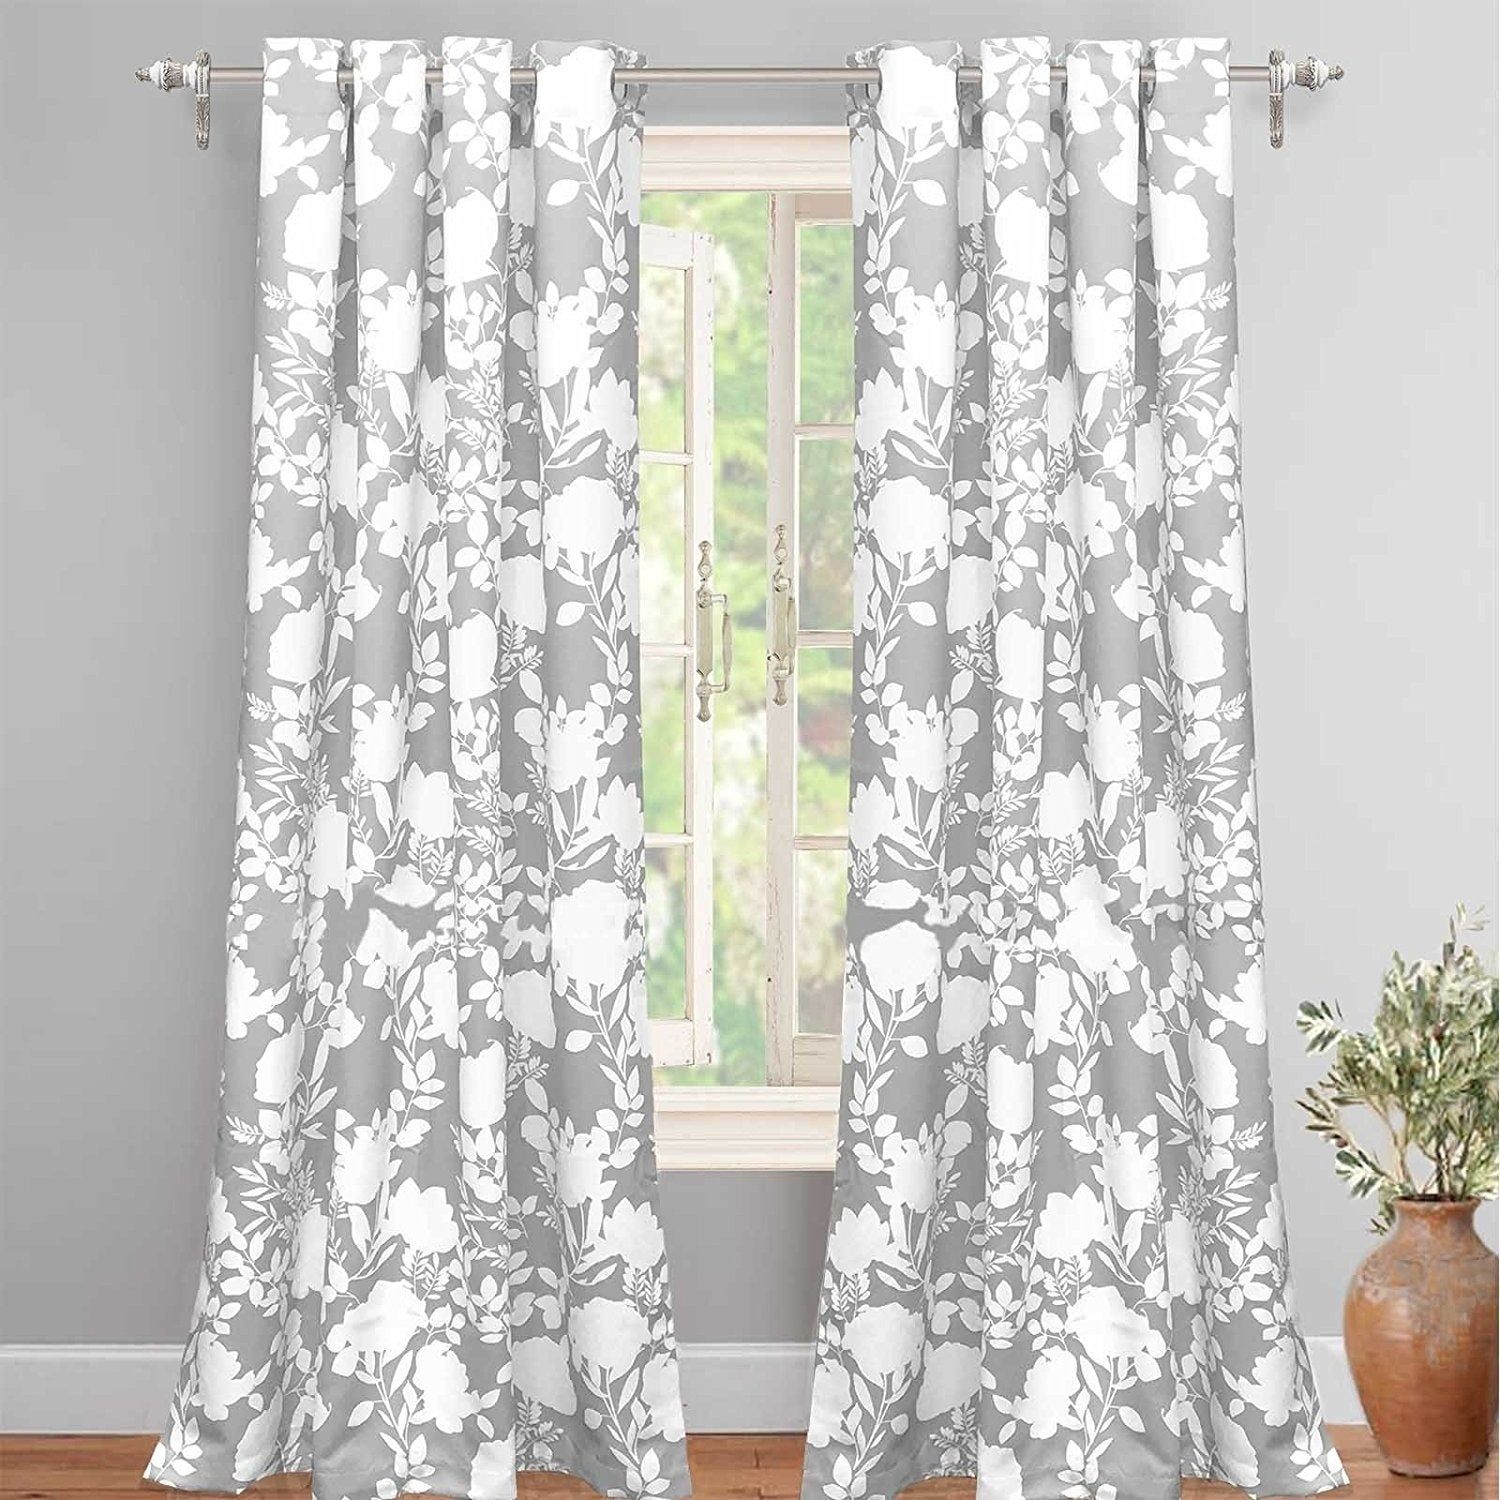 Porch & Den Nolana Floral Room Darkening Grommet Window Curtain Panel Pair Pertaining To Gray Barn Dogwood Floral Curtain Panel Pairs (View 10 of 20)